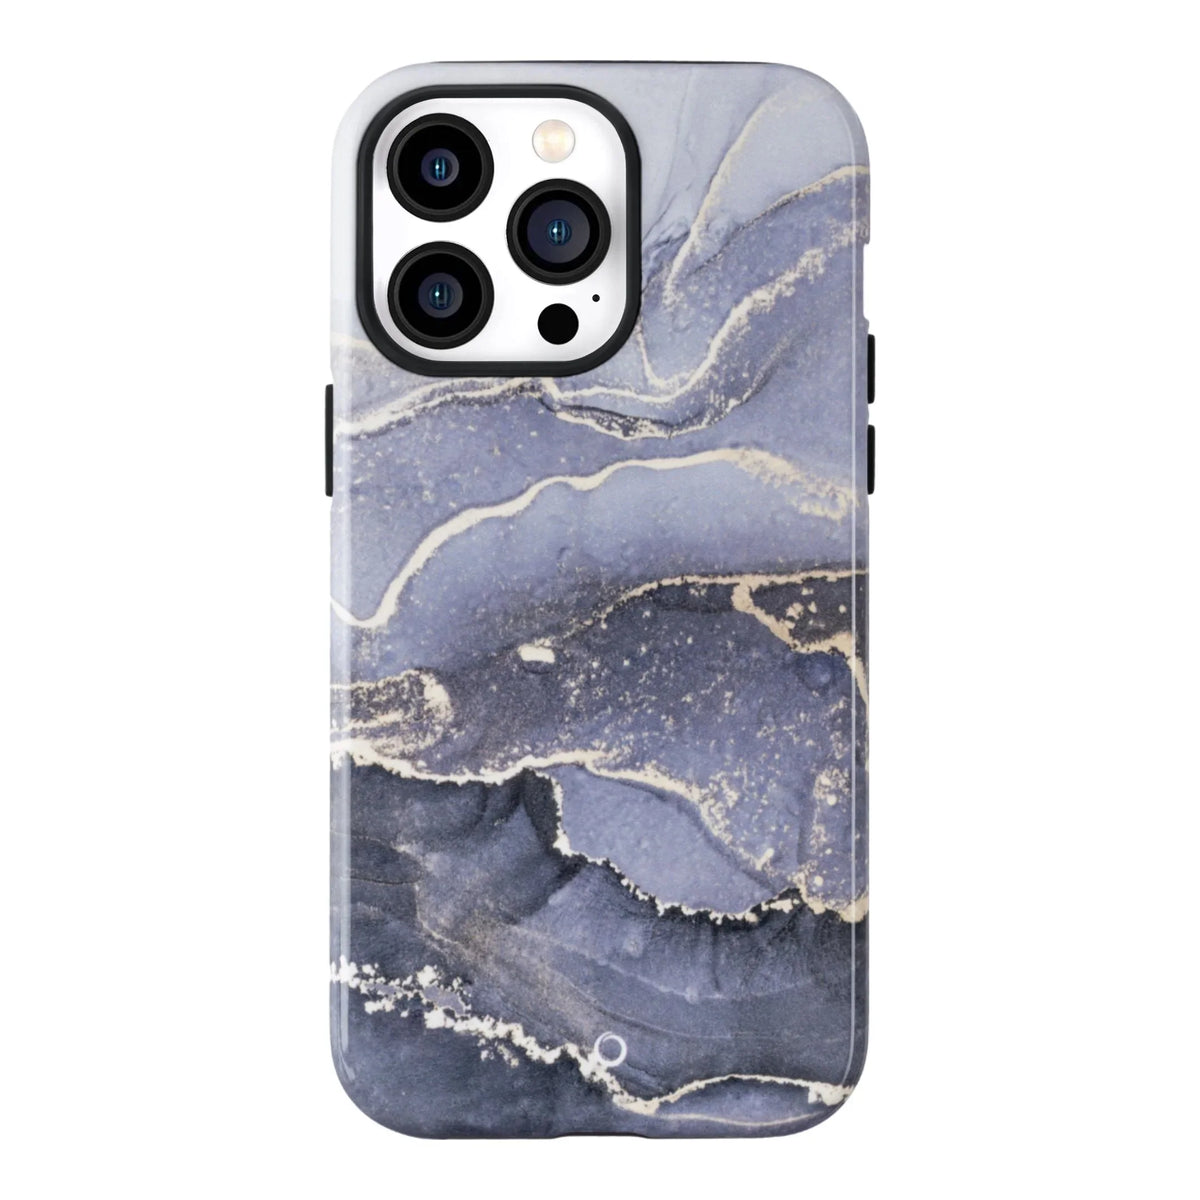 Charcoal Marble iPhone Case - iPhone 11 Pro Max